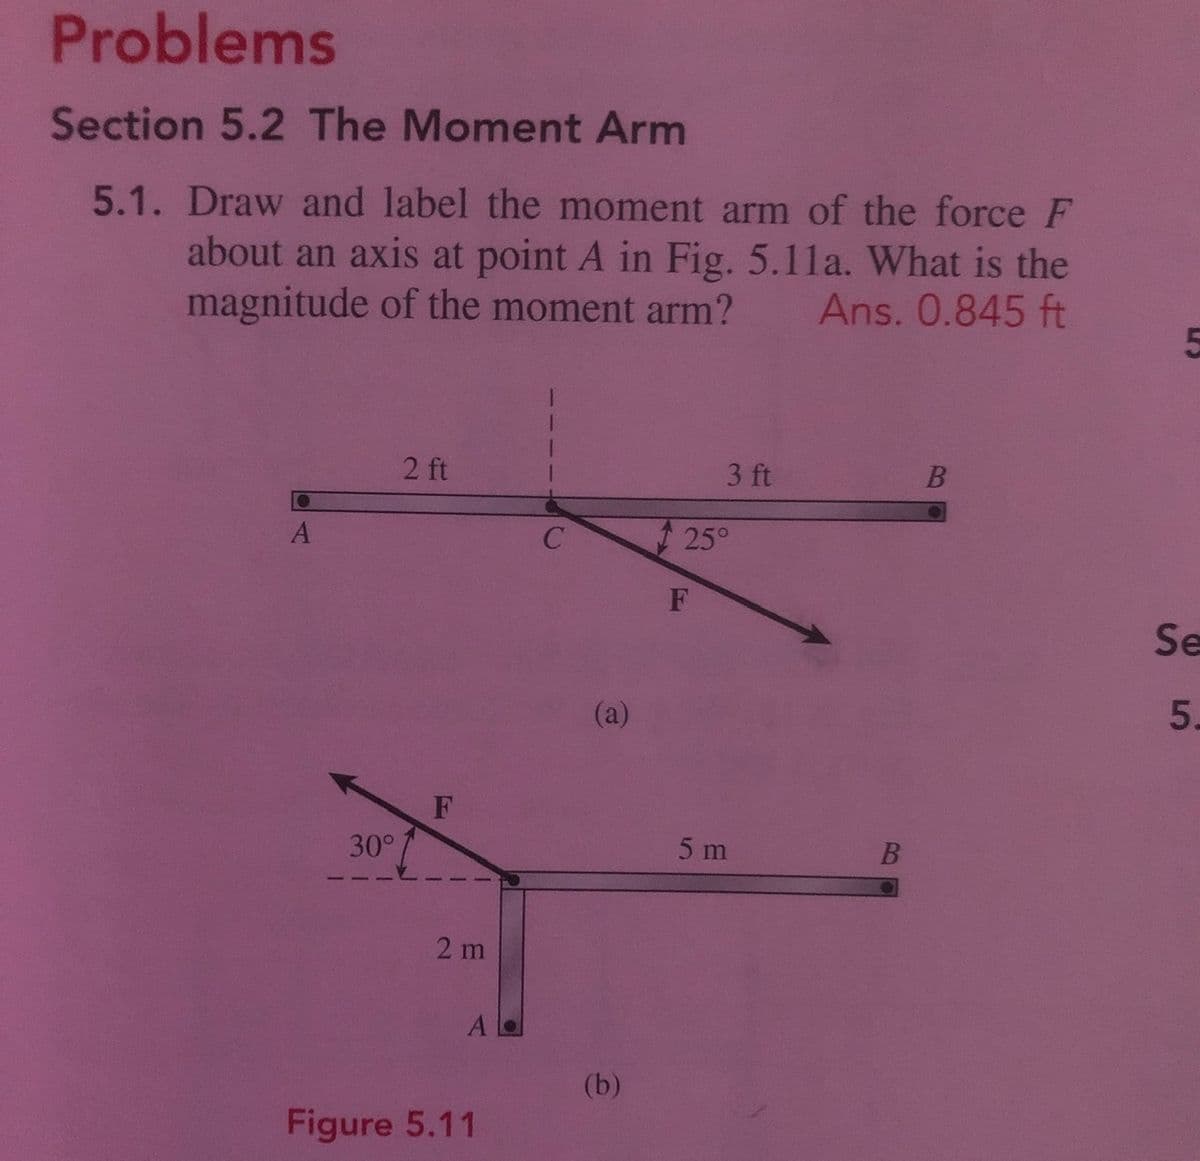 Problems
Section 5.2 The Moment Arm
5.1. Draw and label the moment arm of the force F
about an axis at point A in Fig. 5.11a. What is the
magnitude of the moment arm?
Ans. 0.845 ft
2 ft
3 ft
A
25°
F
Se
(a)
5.
30°
5 m
2 m
A
(b)
Figure 5.11
